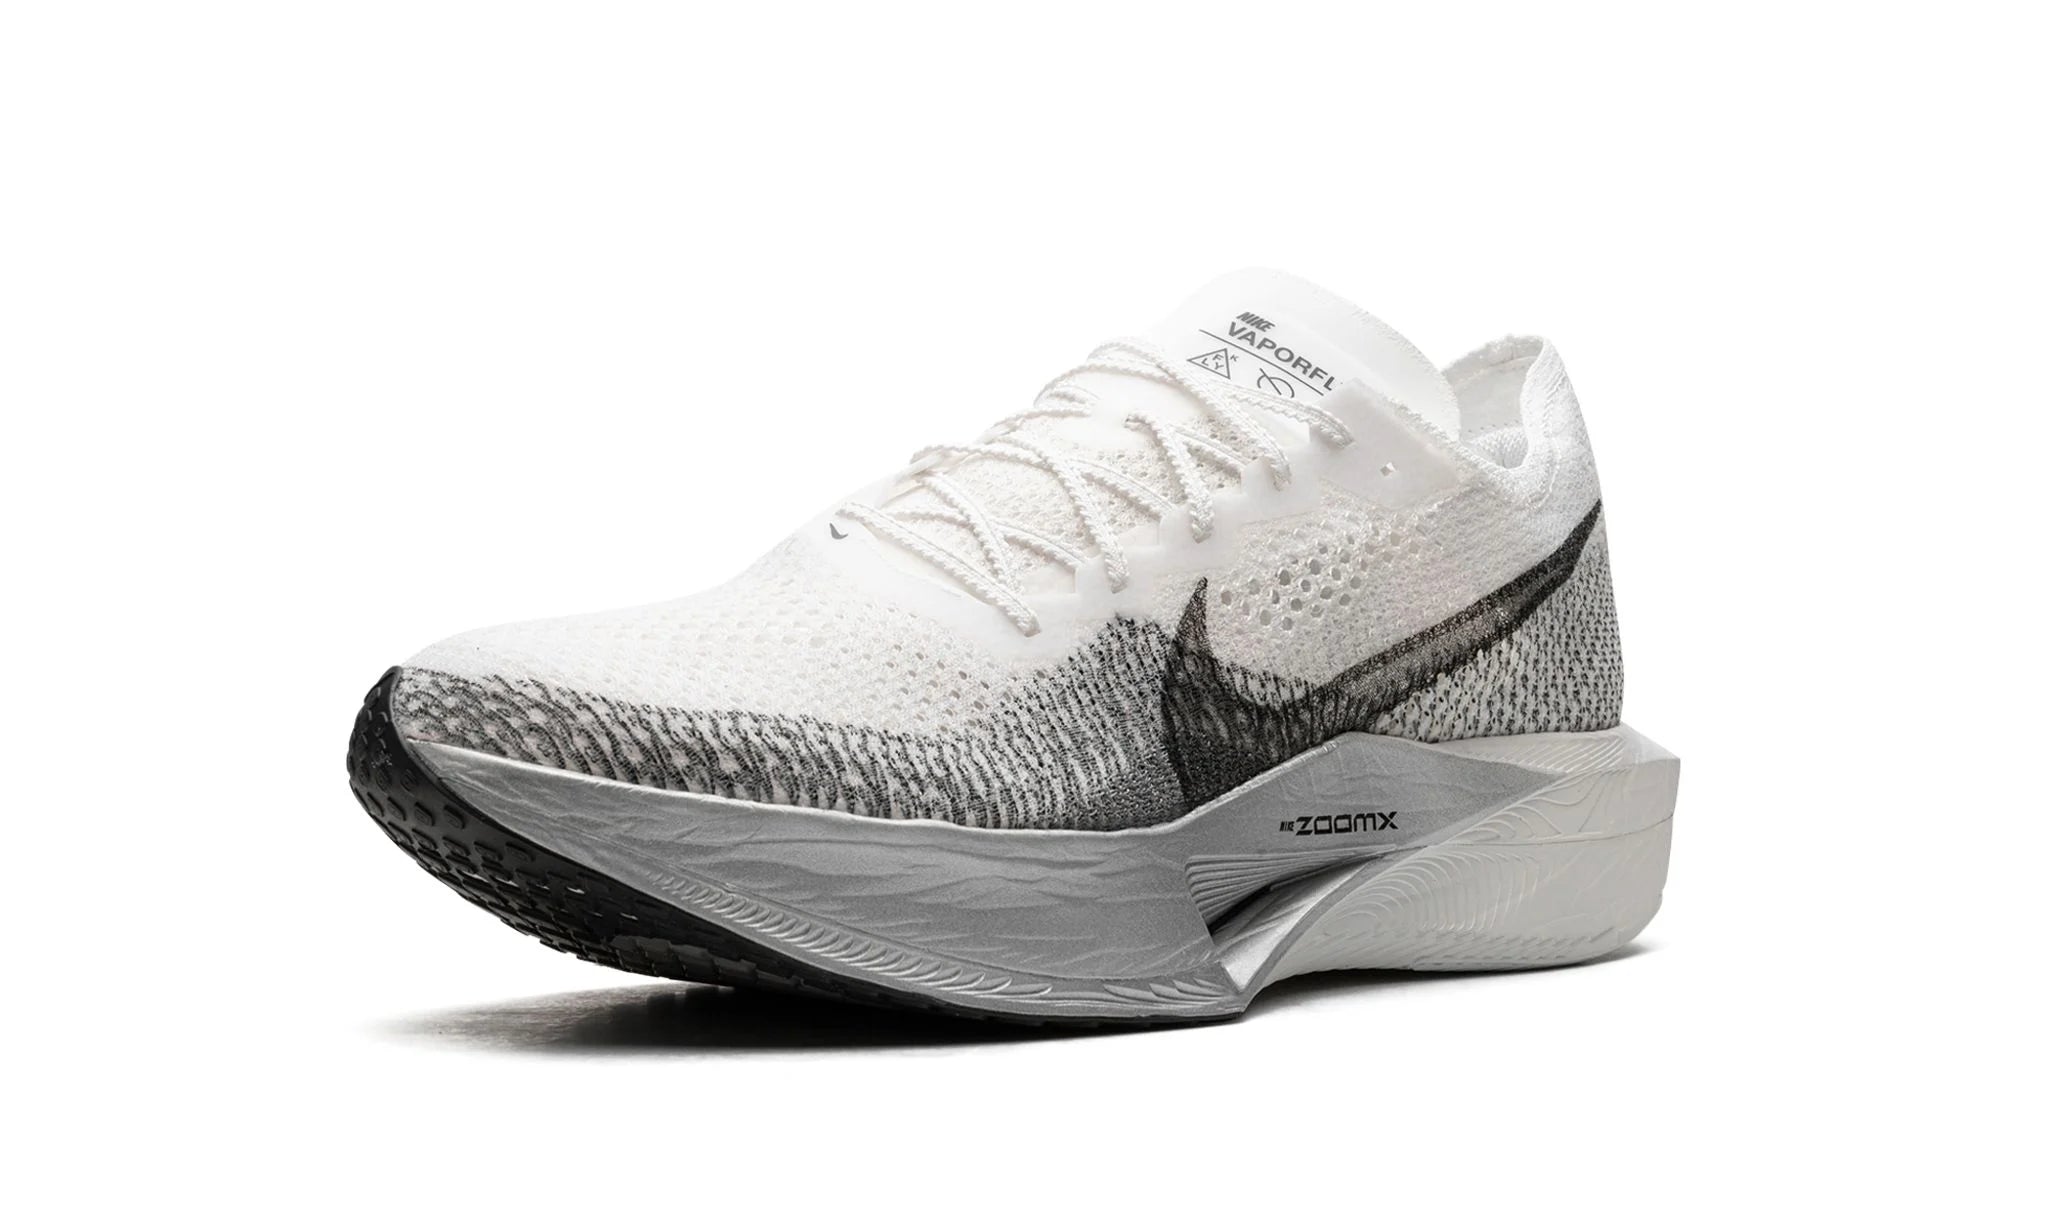 ZOOMX VAPORFLY 3 "White Particle Grey"